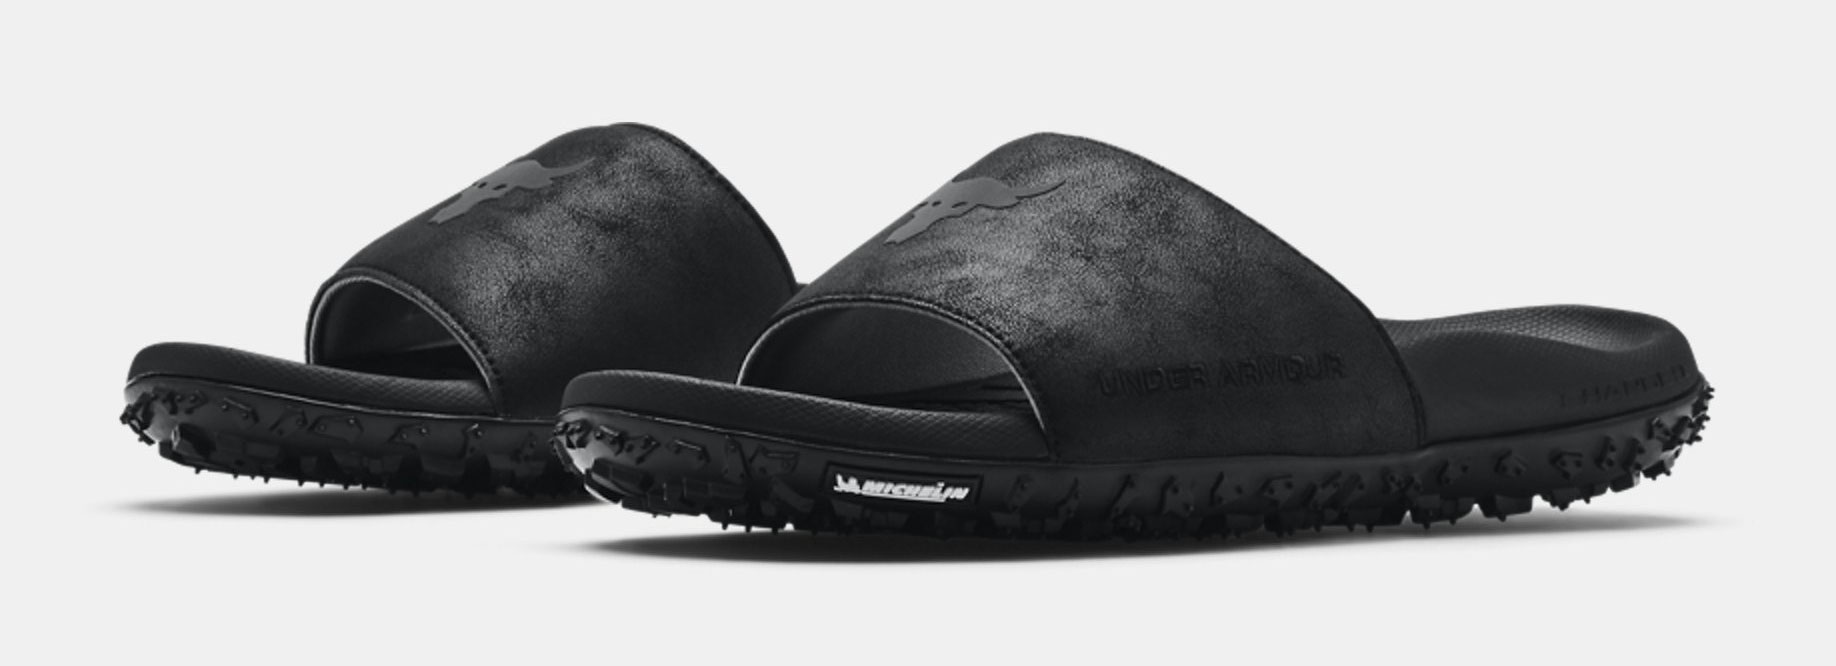 Project Rock Under Armour Slides in Black and White